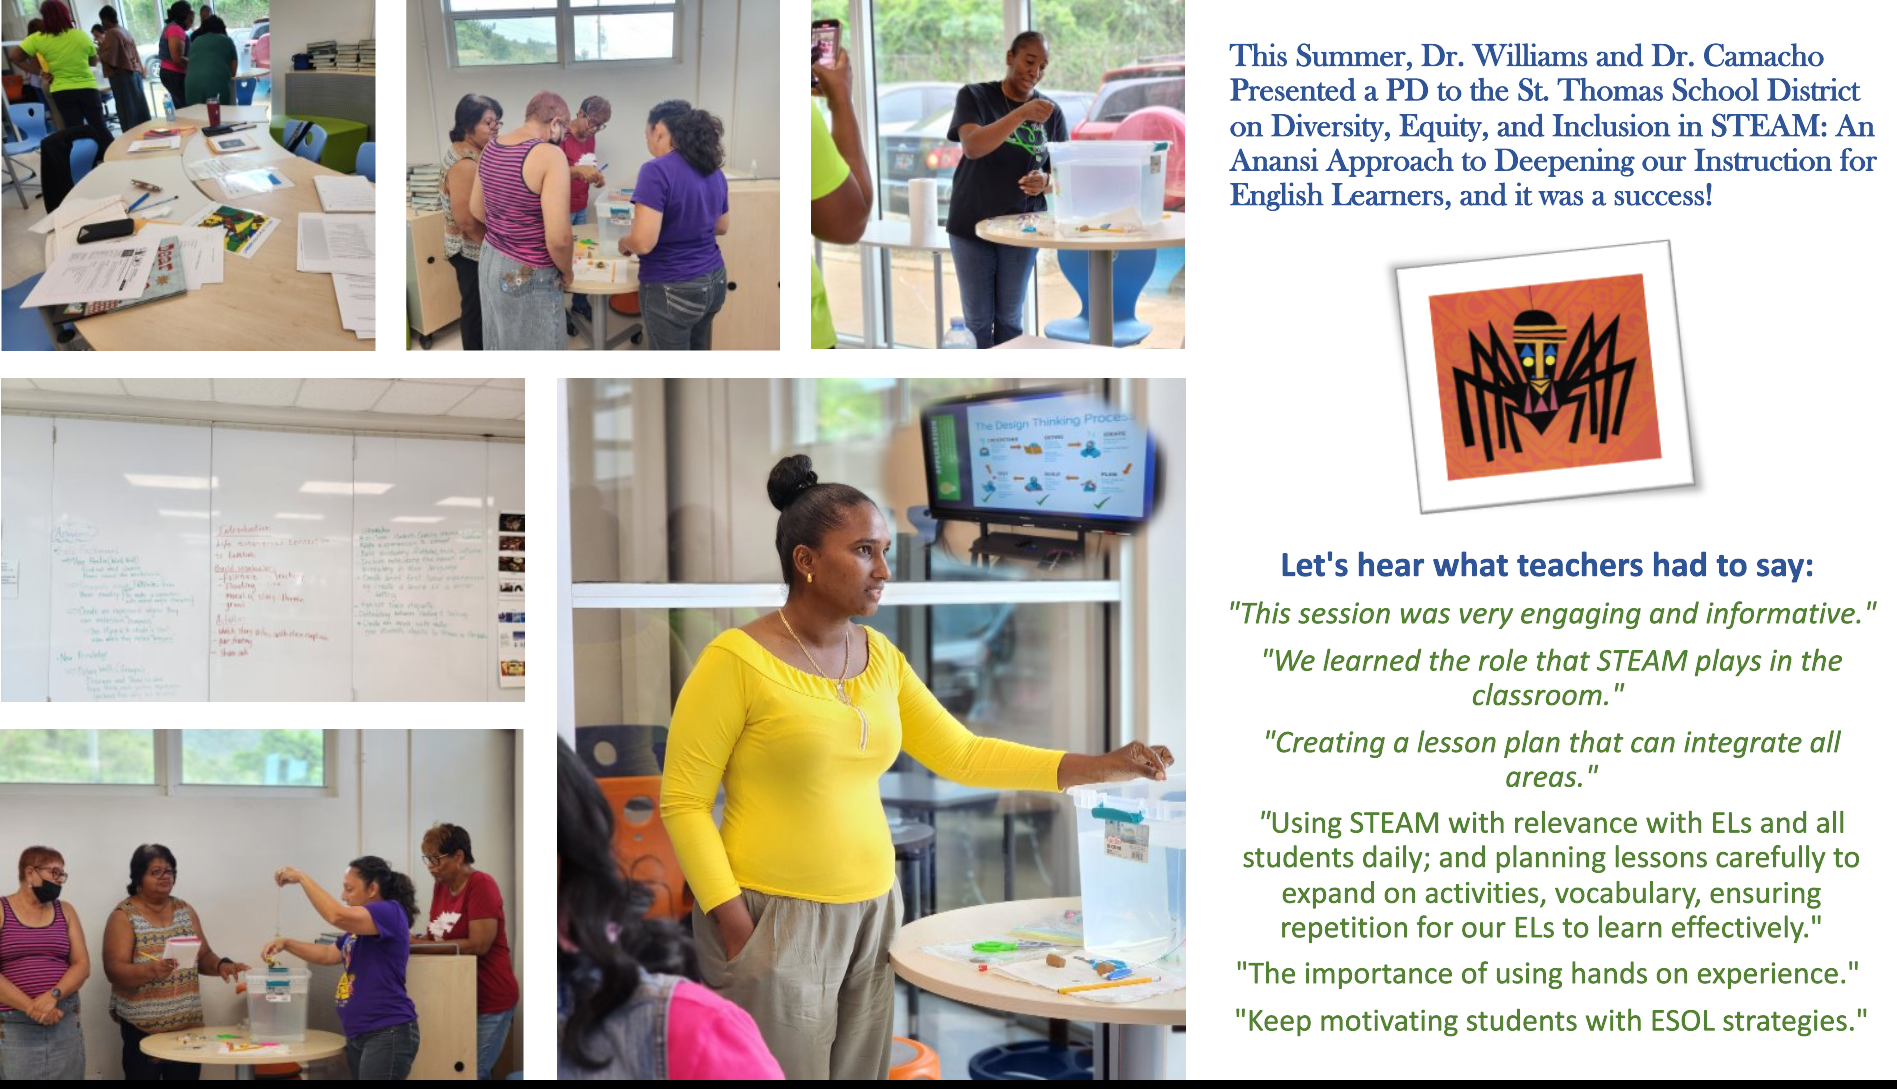 iversity, Equity, and Inclusion in STEAM: An Anansi Approach to Deepening our Instruction for English Learners